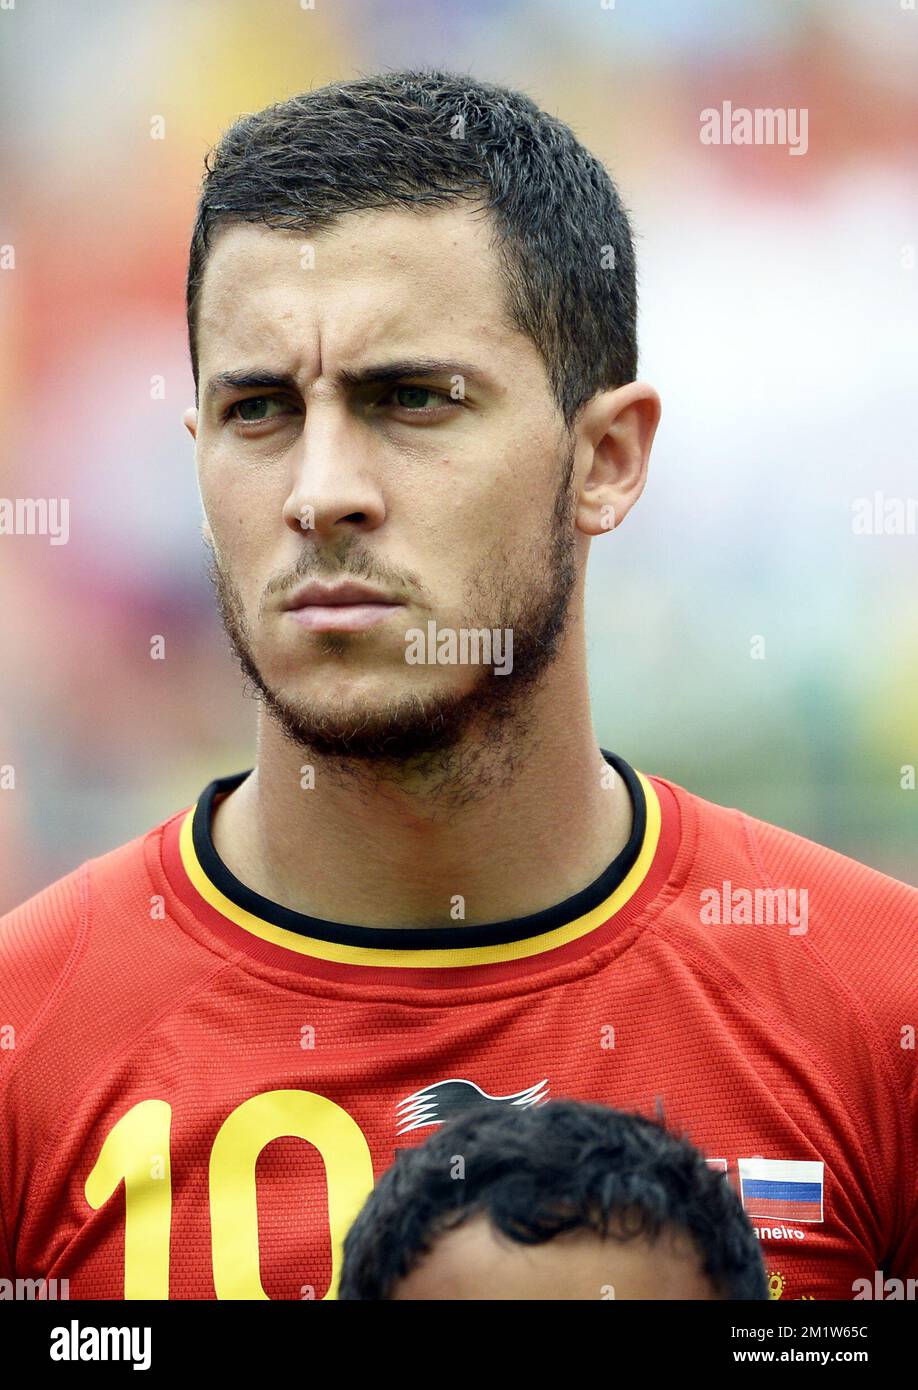 20140622 - RIO DE JANEIRO, BRAZIL: Belgium's Eden Hazard pictured at the start of a soccer game between Belgian national team The Red Devils and Russia in Rio de Janeiro, Brazil, the second game in Group H of the first round of the 2014 FIFA World Cup, Sunday 22 June 2014.   BELGA PHOTO DIRK WAEM Stock Photo